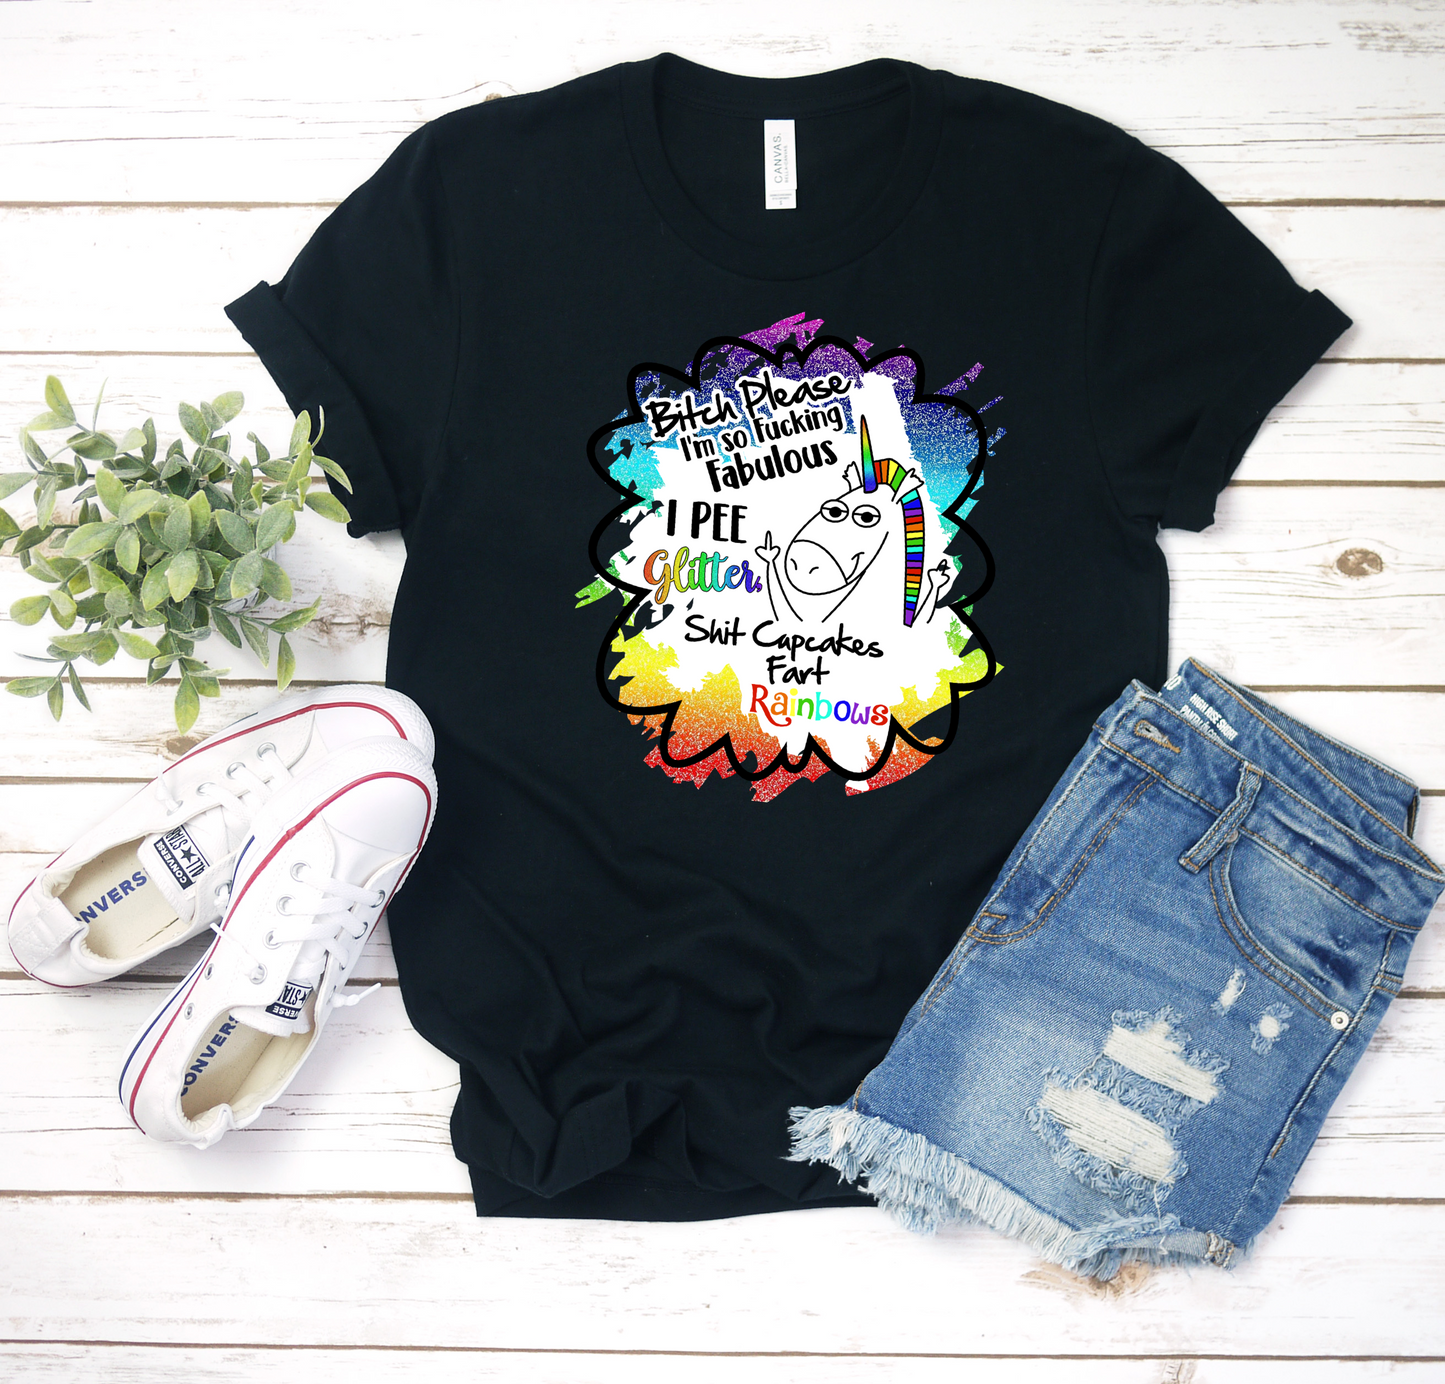 Bitch please I’m so fucking fabulous I pee glitter shit cupcakes and fart rainbows frame DTF TRANSFERPRINT TO ORDER